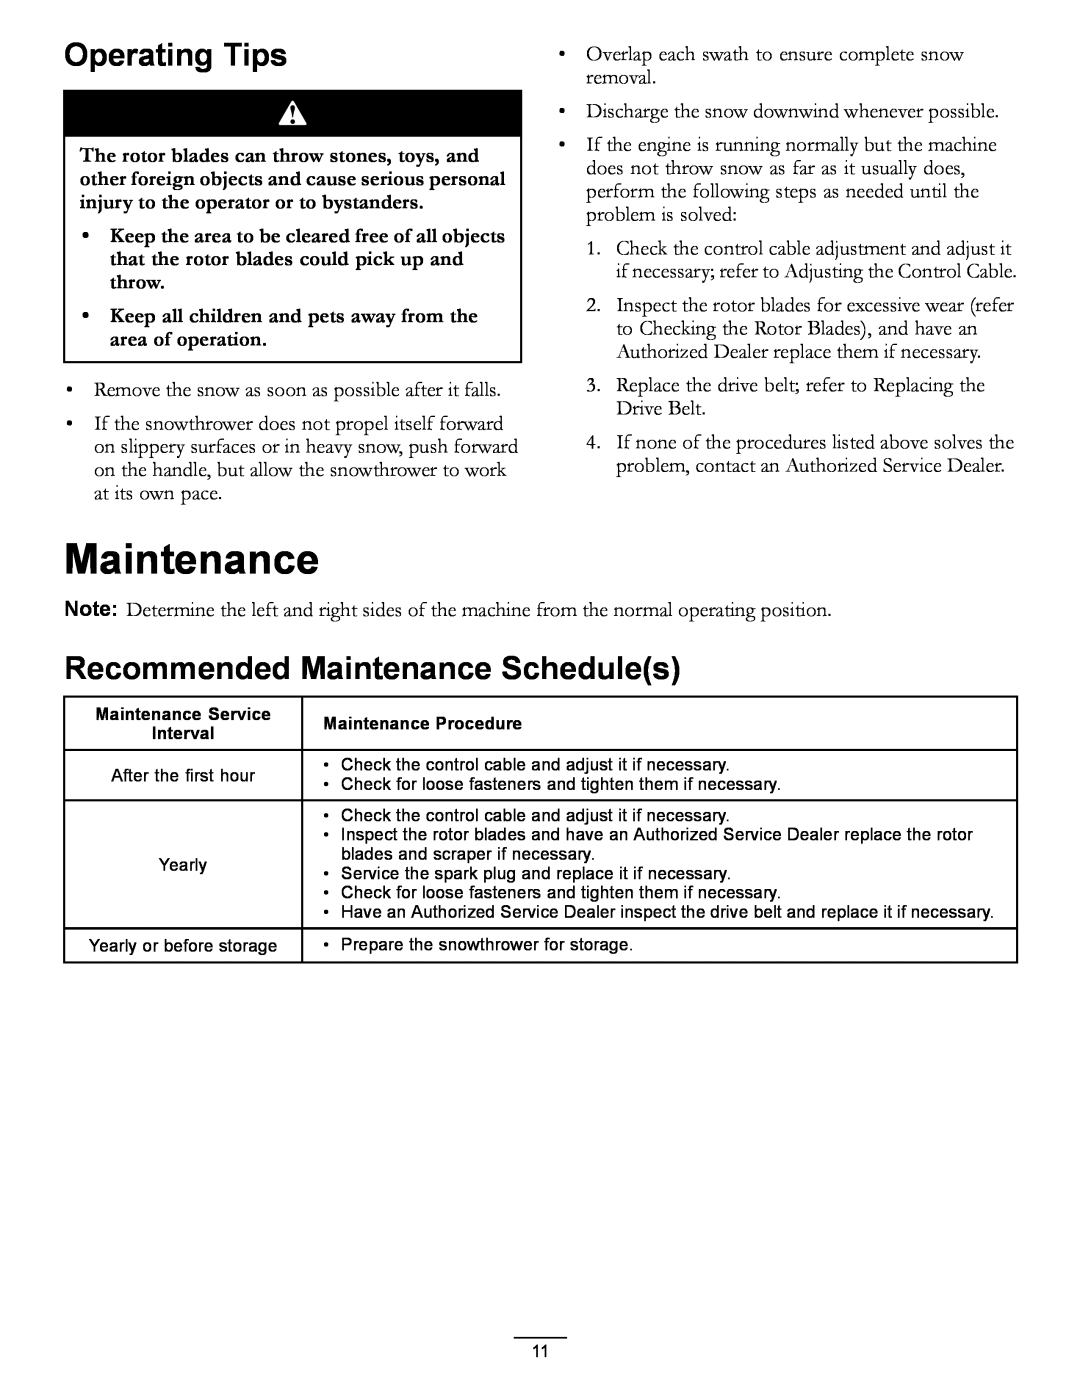 Toro 38583, 38584 owner manual Operating Tips, Recommended Maintenance Schedules 